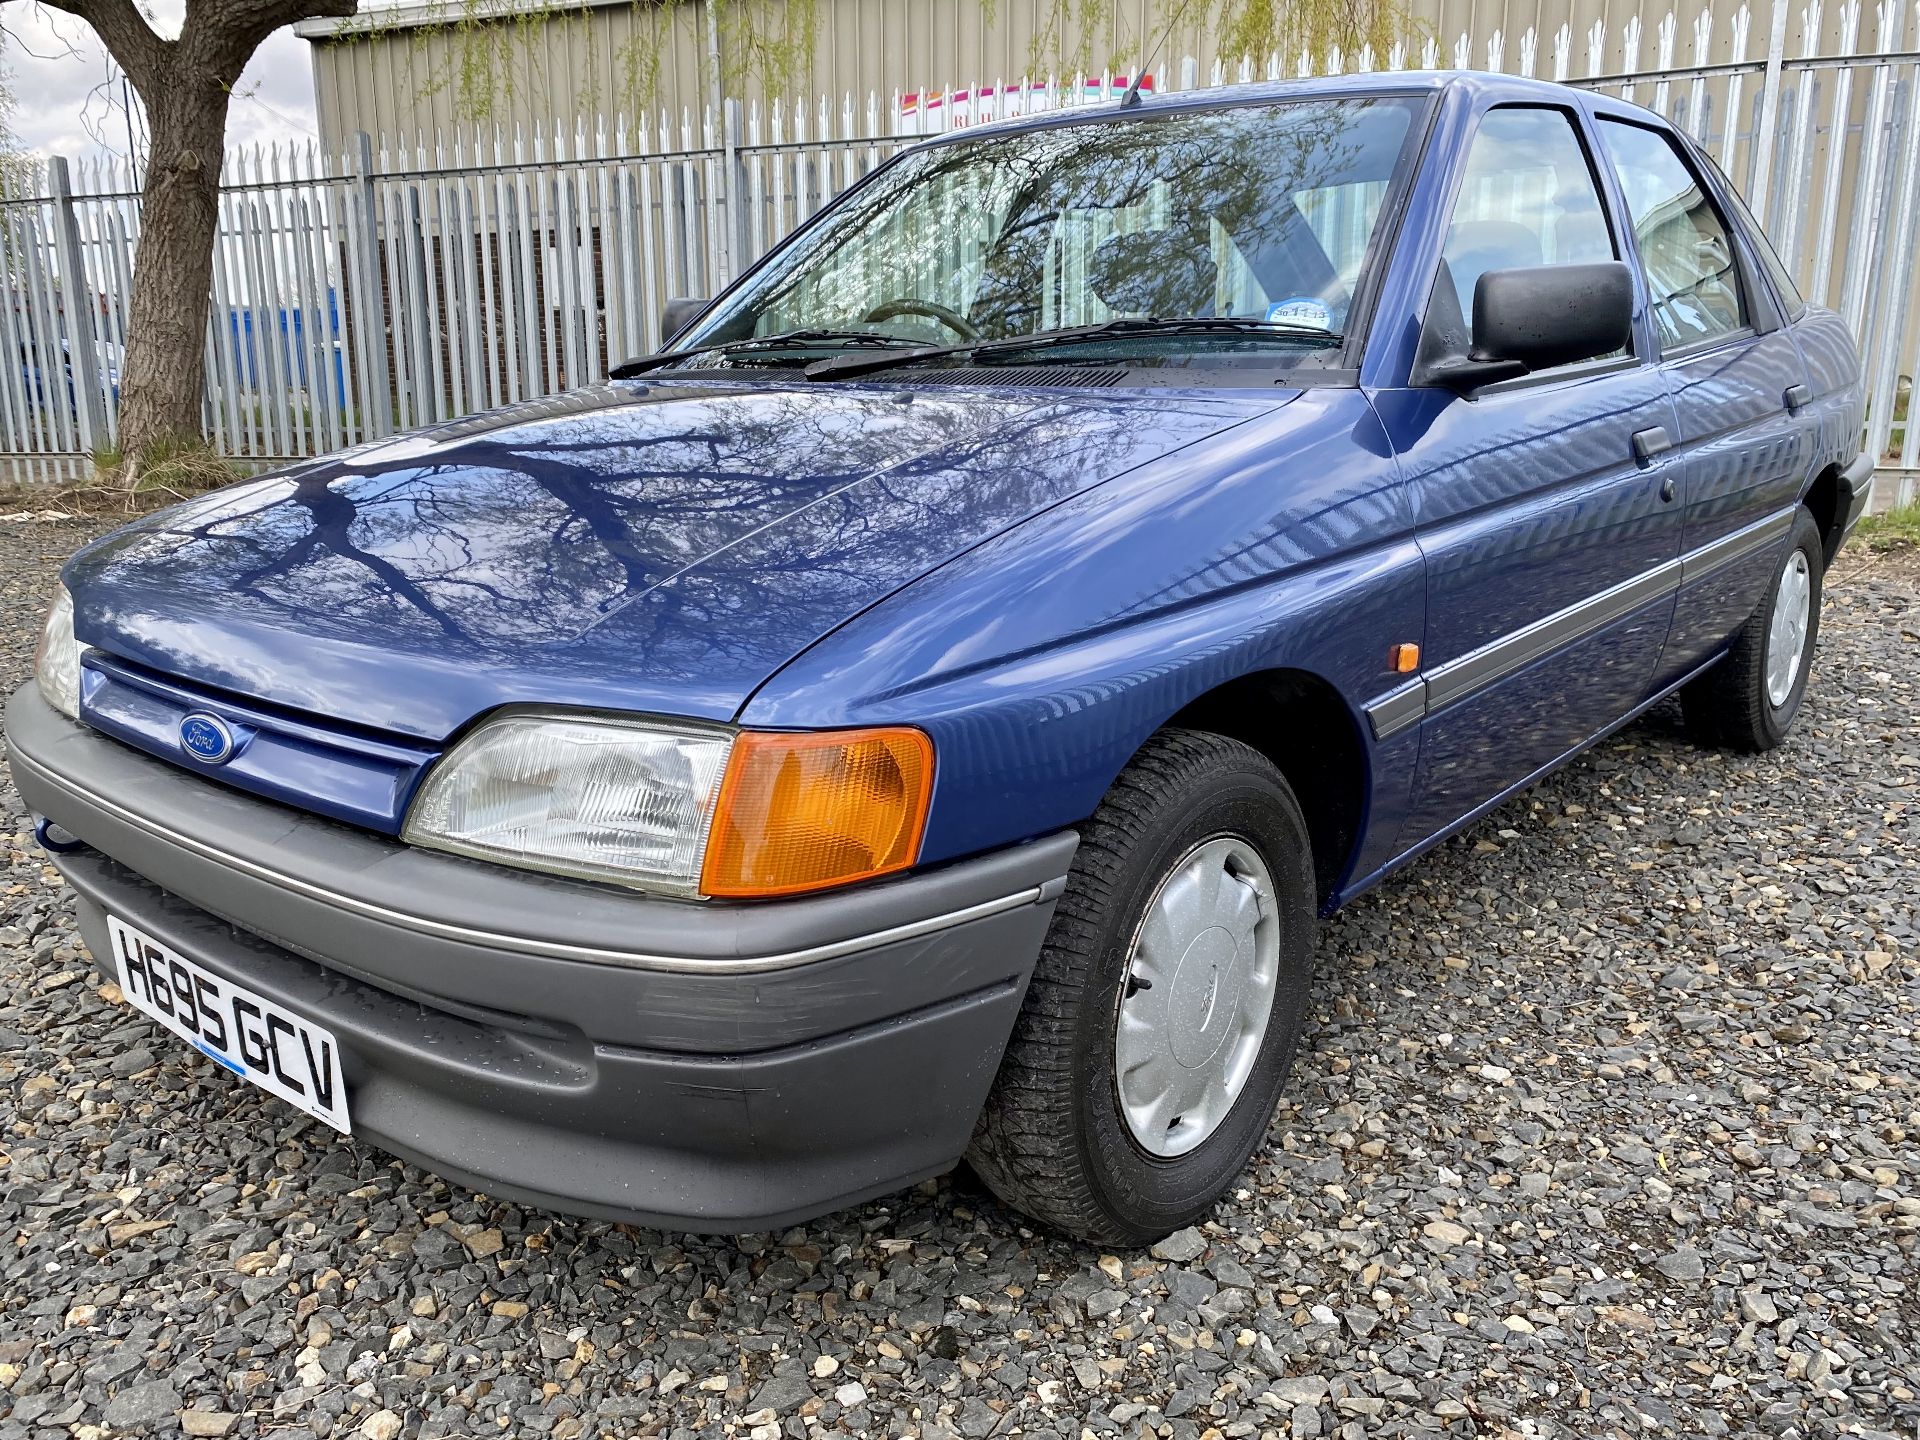 Ford Escort LX  - Image 31 of 54